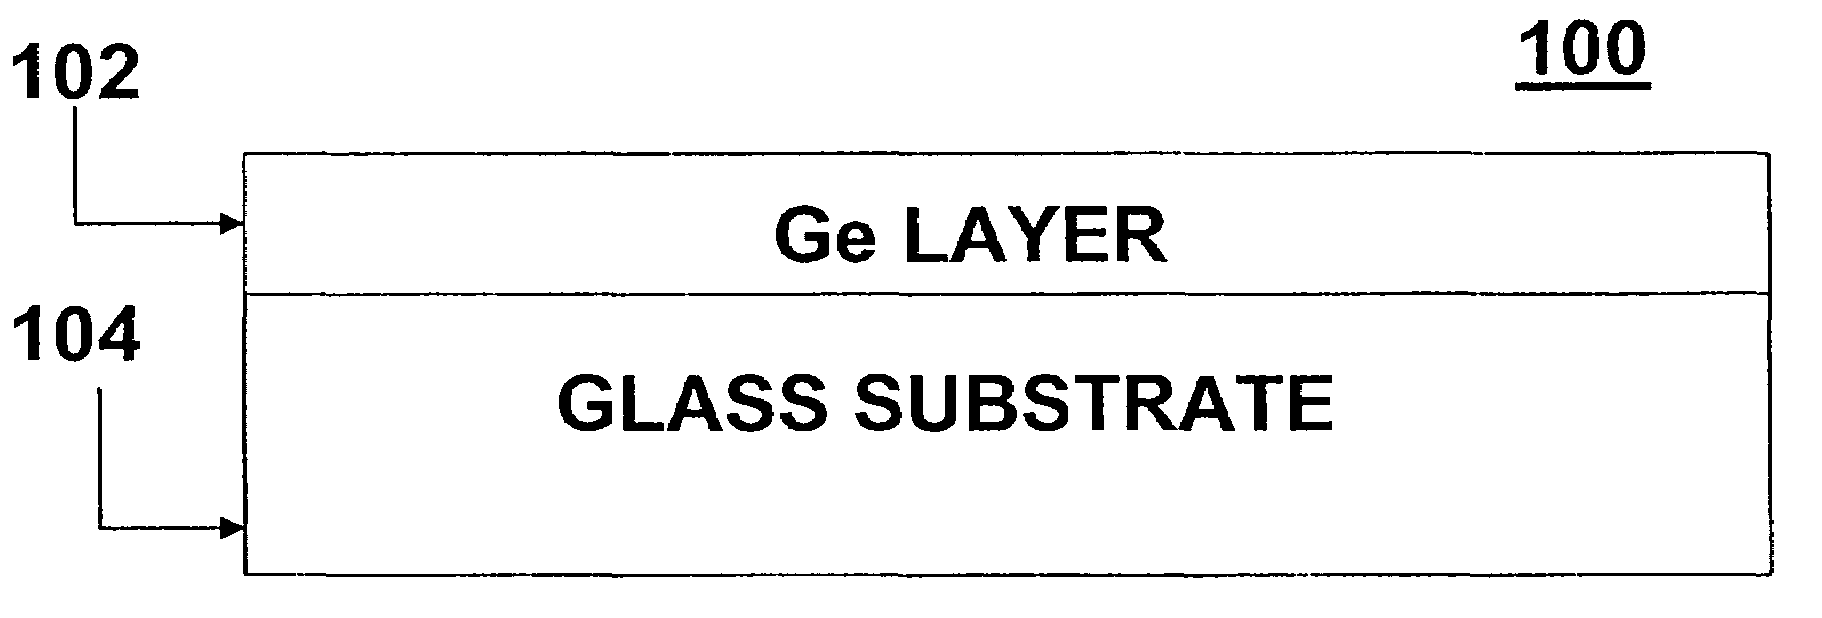 Germanium on glass and glass-ceramic structures